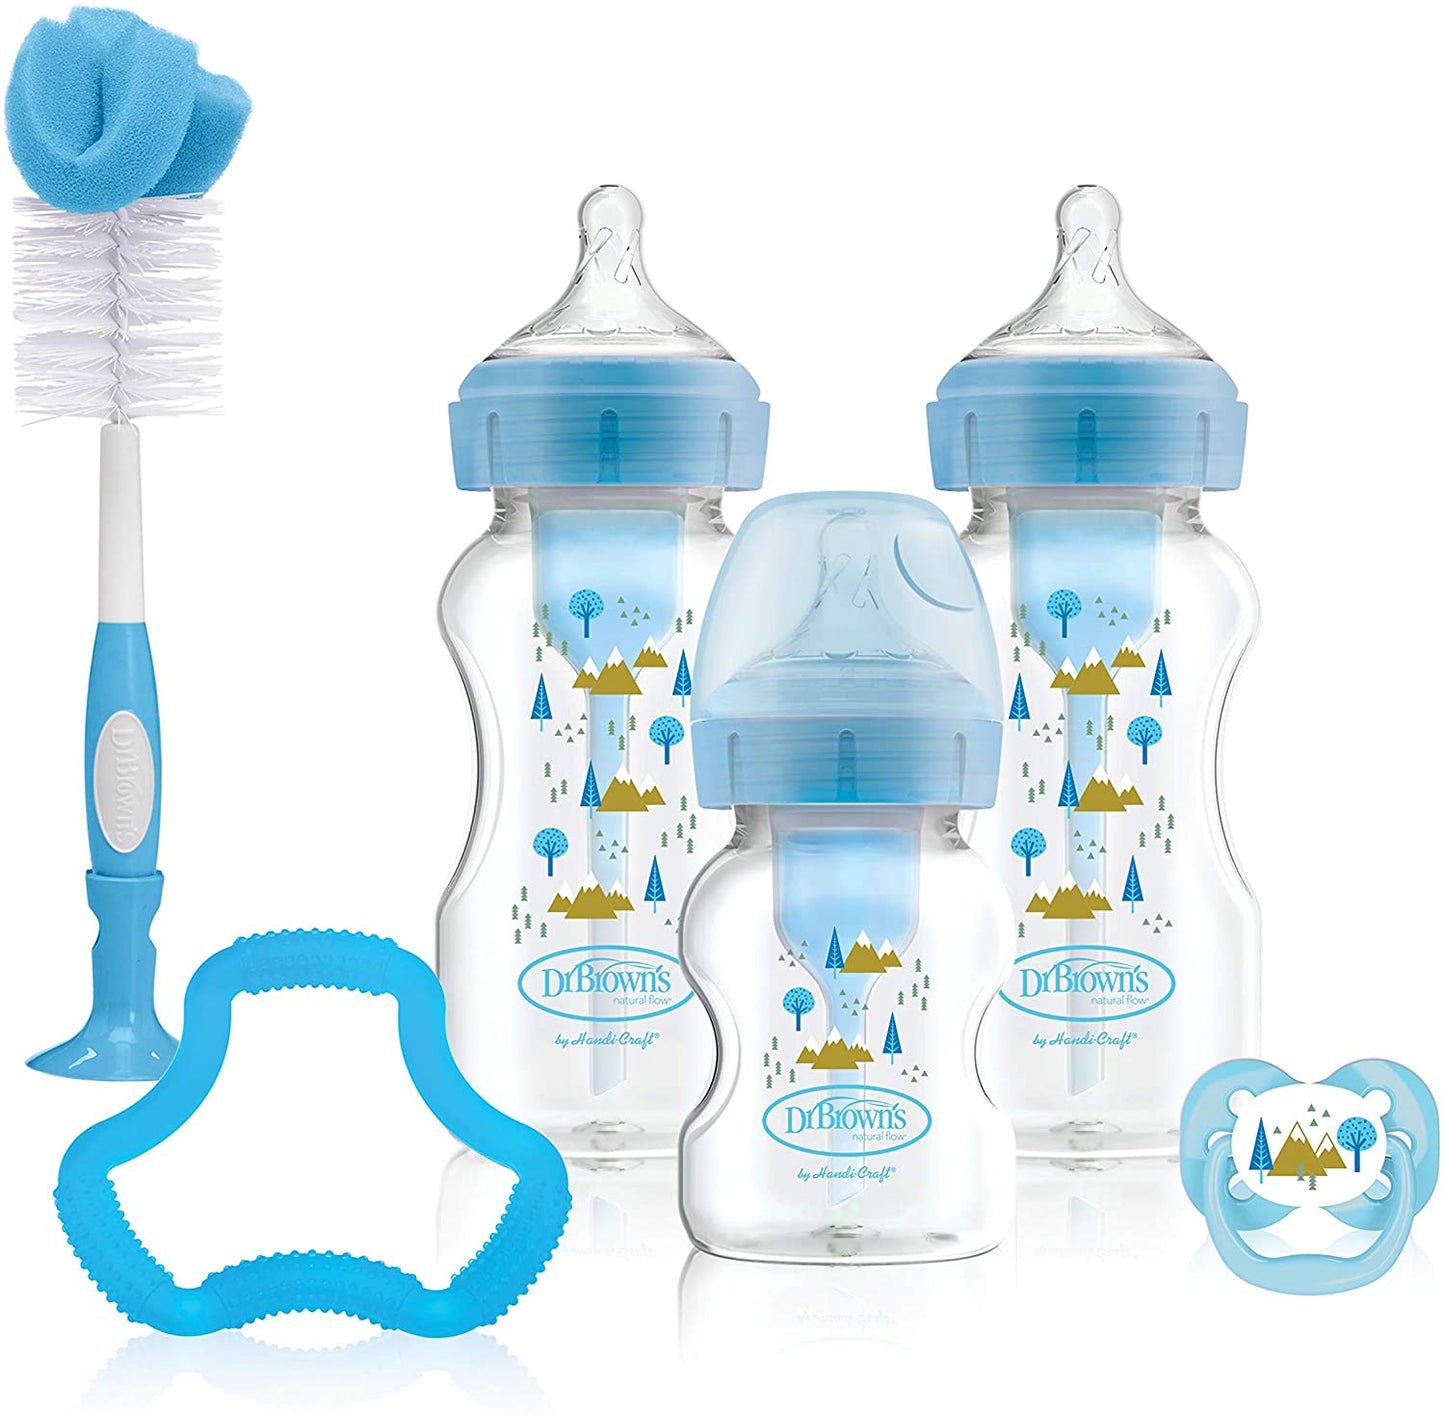 Dr.Brown's Wide-Neck Options+ BLUE Gift Set    (2x270 ml & 1x150 ml bottles, 1 Blue Bottle Brush, 1 Blue Flexees Teether, 1 Pacifier, 2 Cleaning Brushes)